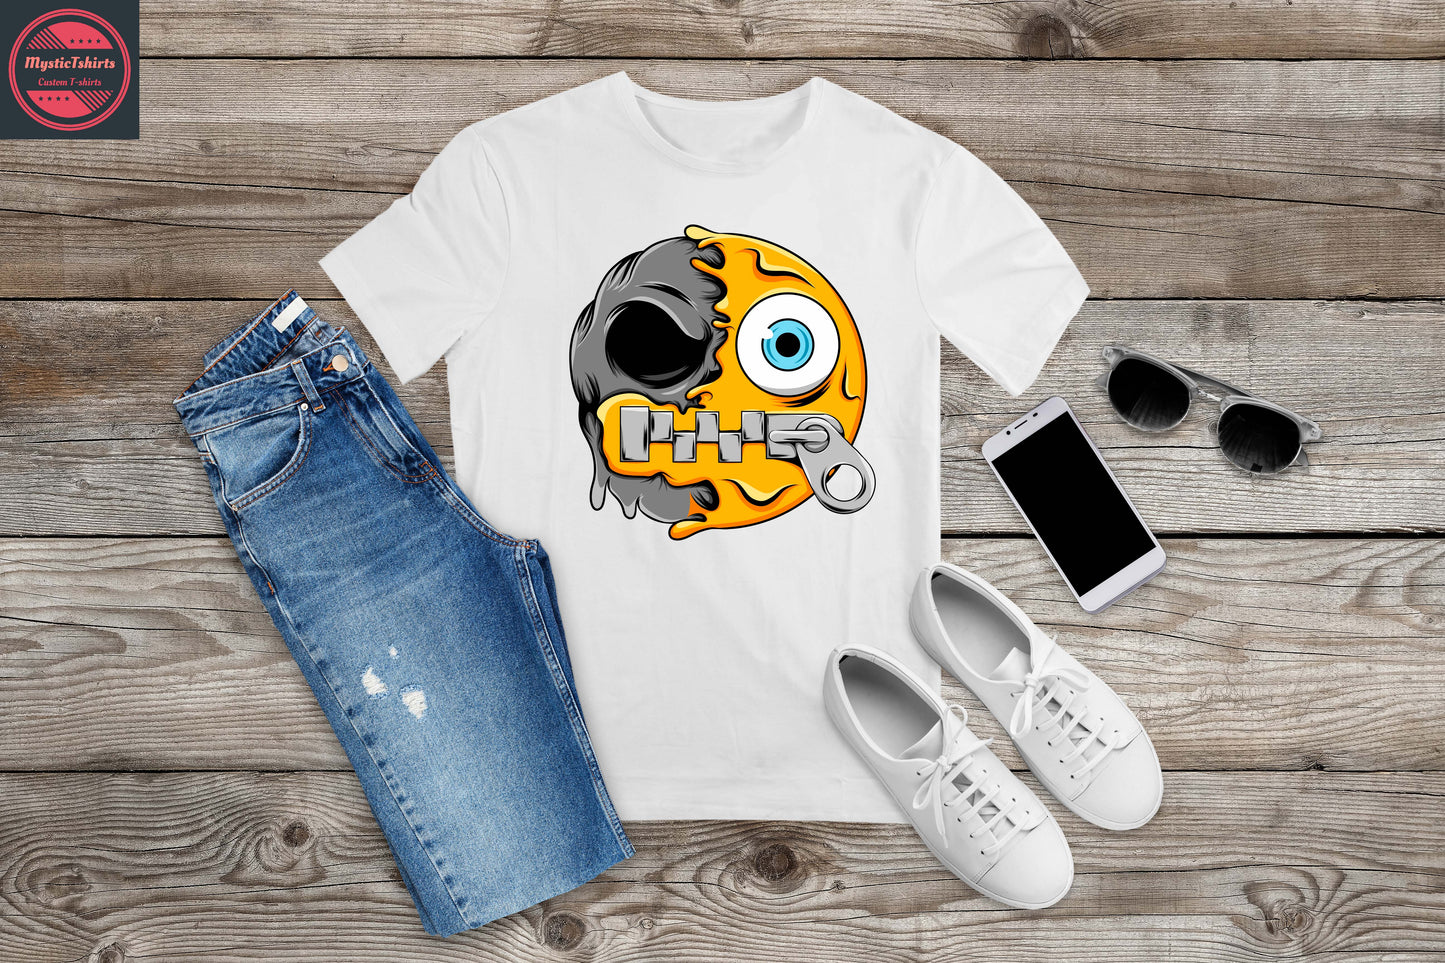 084. CRAZY FACE, Personalized T-Shirt, Custom Text, Make Your Own Shirt, Custom Tee